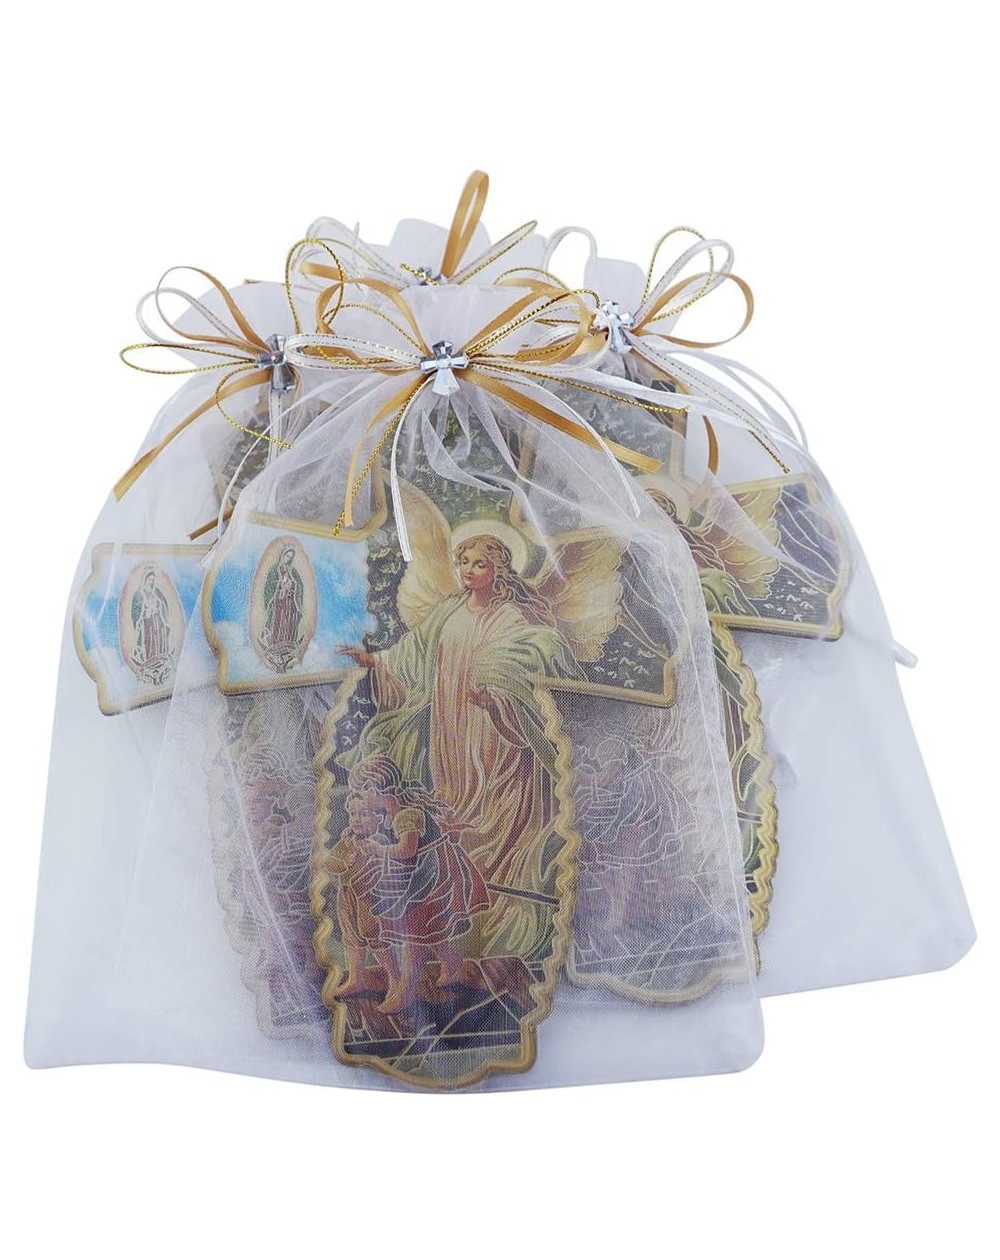 Favors Guardian Angel Wall Cross in Decorated Organza Bag 12PCS Baptism Favor/Christening Favor/First Communion Favor - CC183...